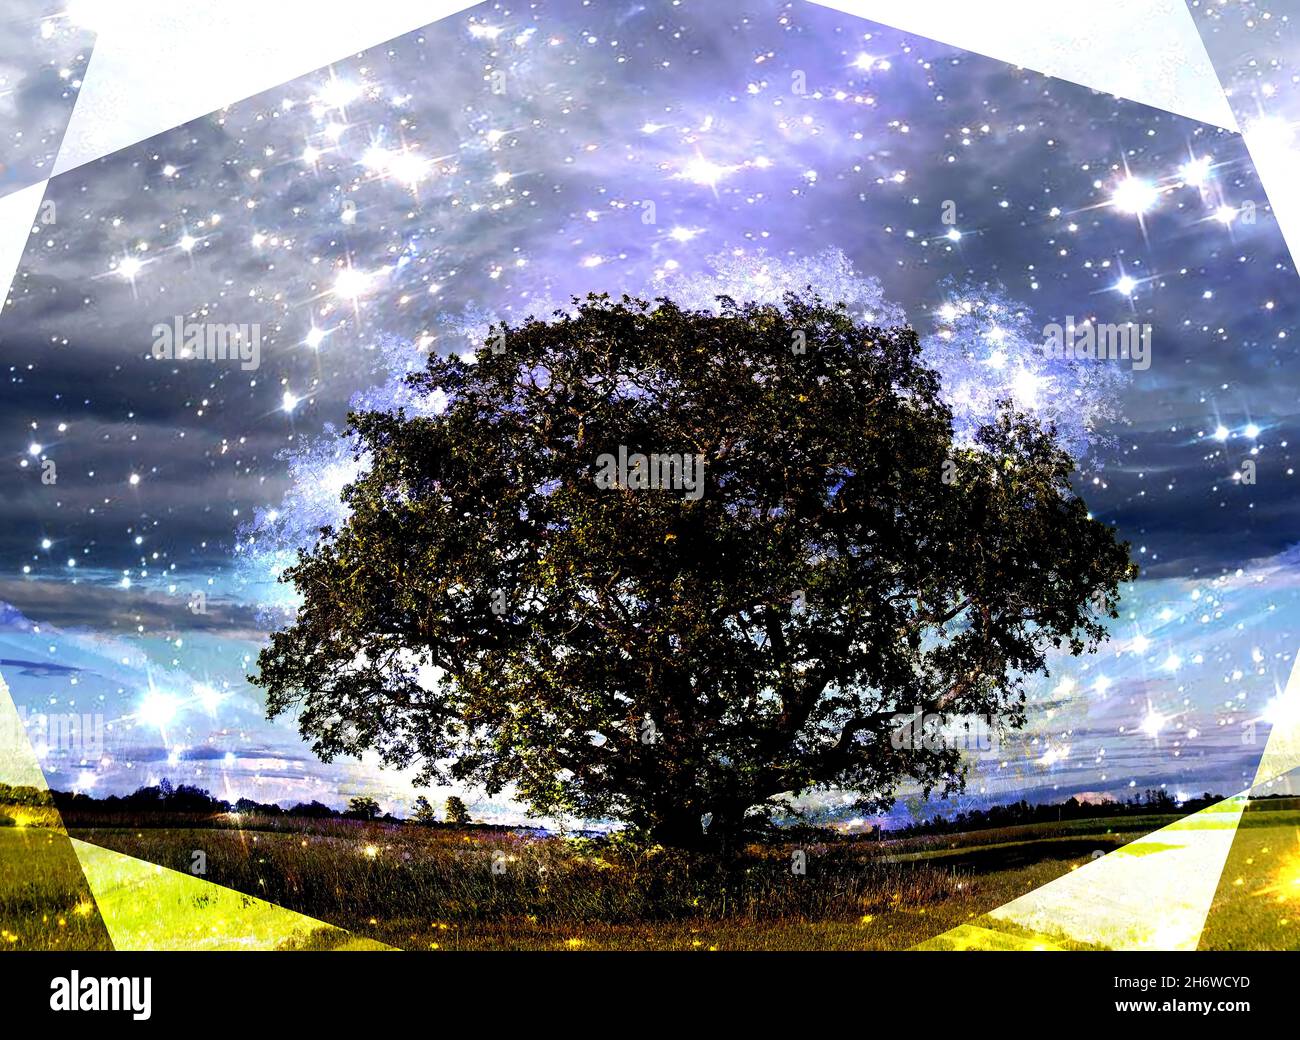 The Druid #39 s Sacred Tree and Magic Elements of this image furnished by